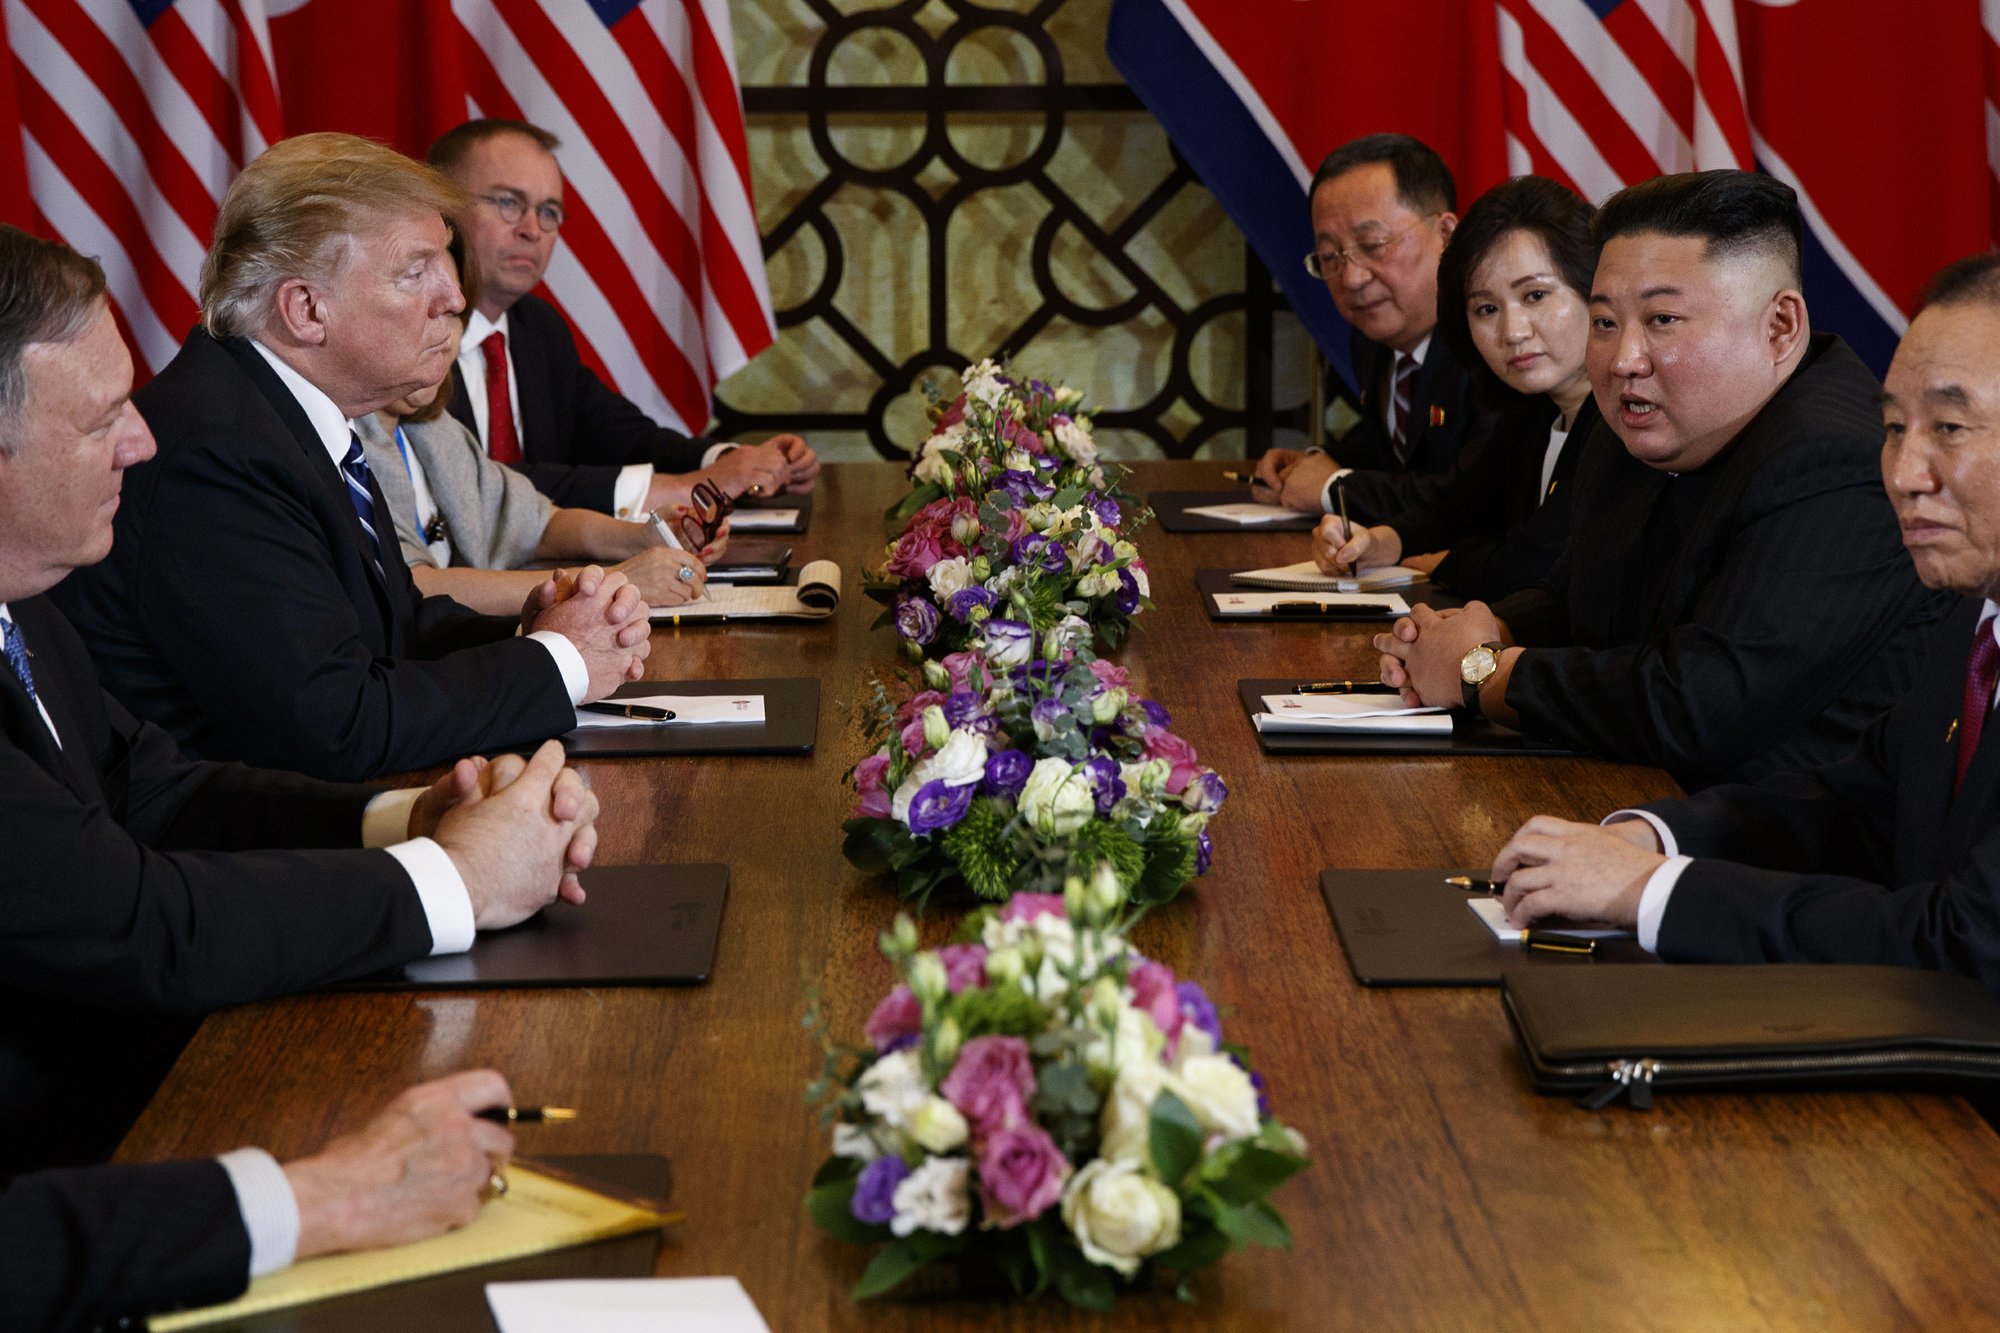 President Donald Trump speaks during a meeting with North Korean leader Kim Jong Un Thursday, Feb. 28, 2019, in Hanoi. At front right is Kim Yong Chol, a North Korean senior ruling party official and former intelligence chief. At left is Secretary of State Mike Pompeo, second from left. (AP Photo/ Evan Vucci)